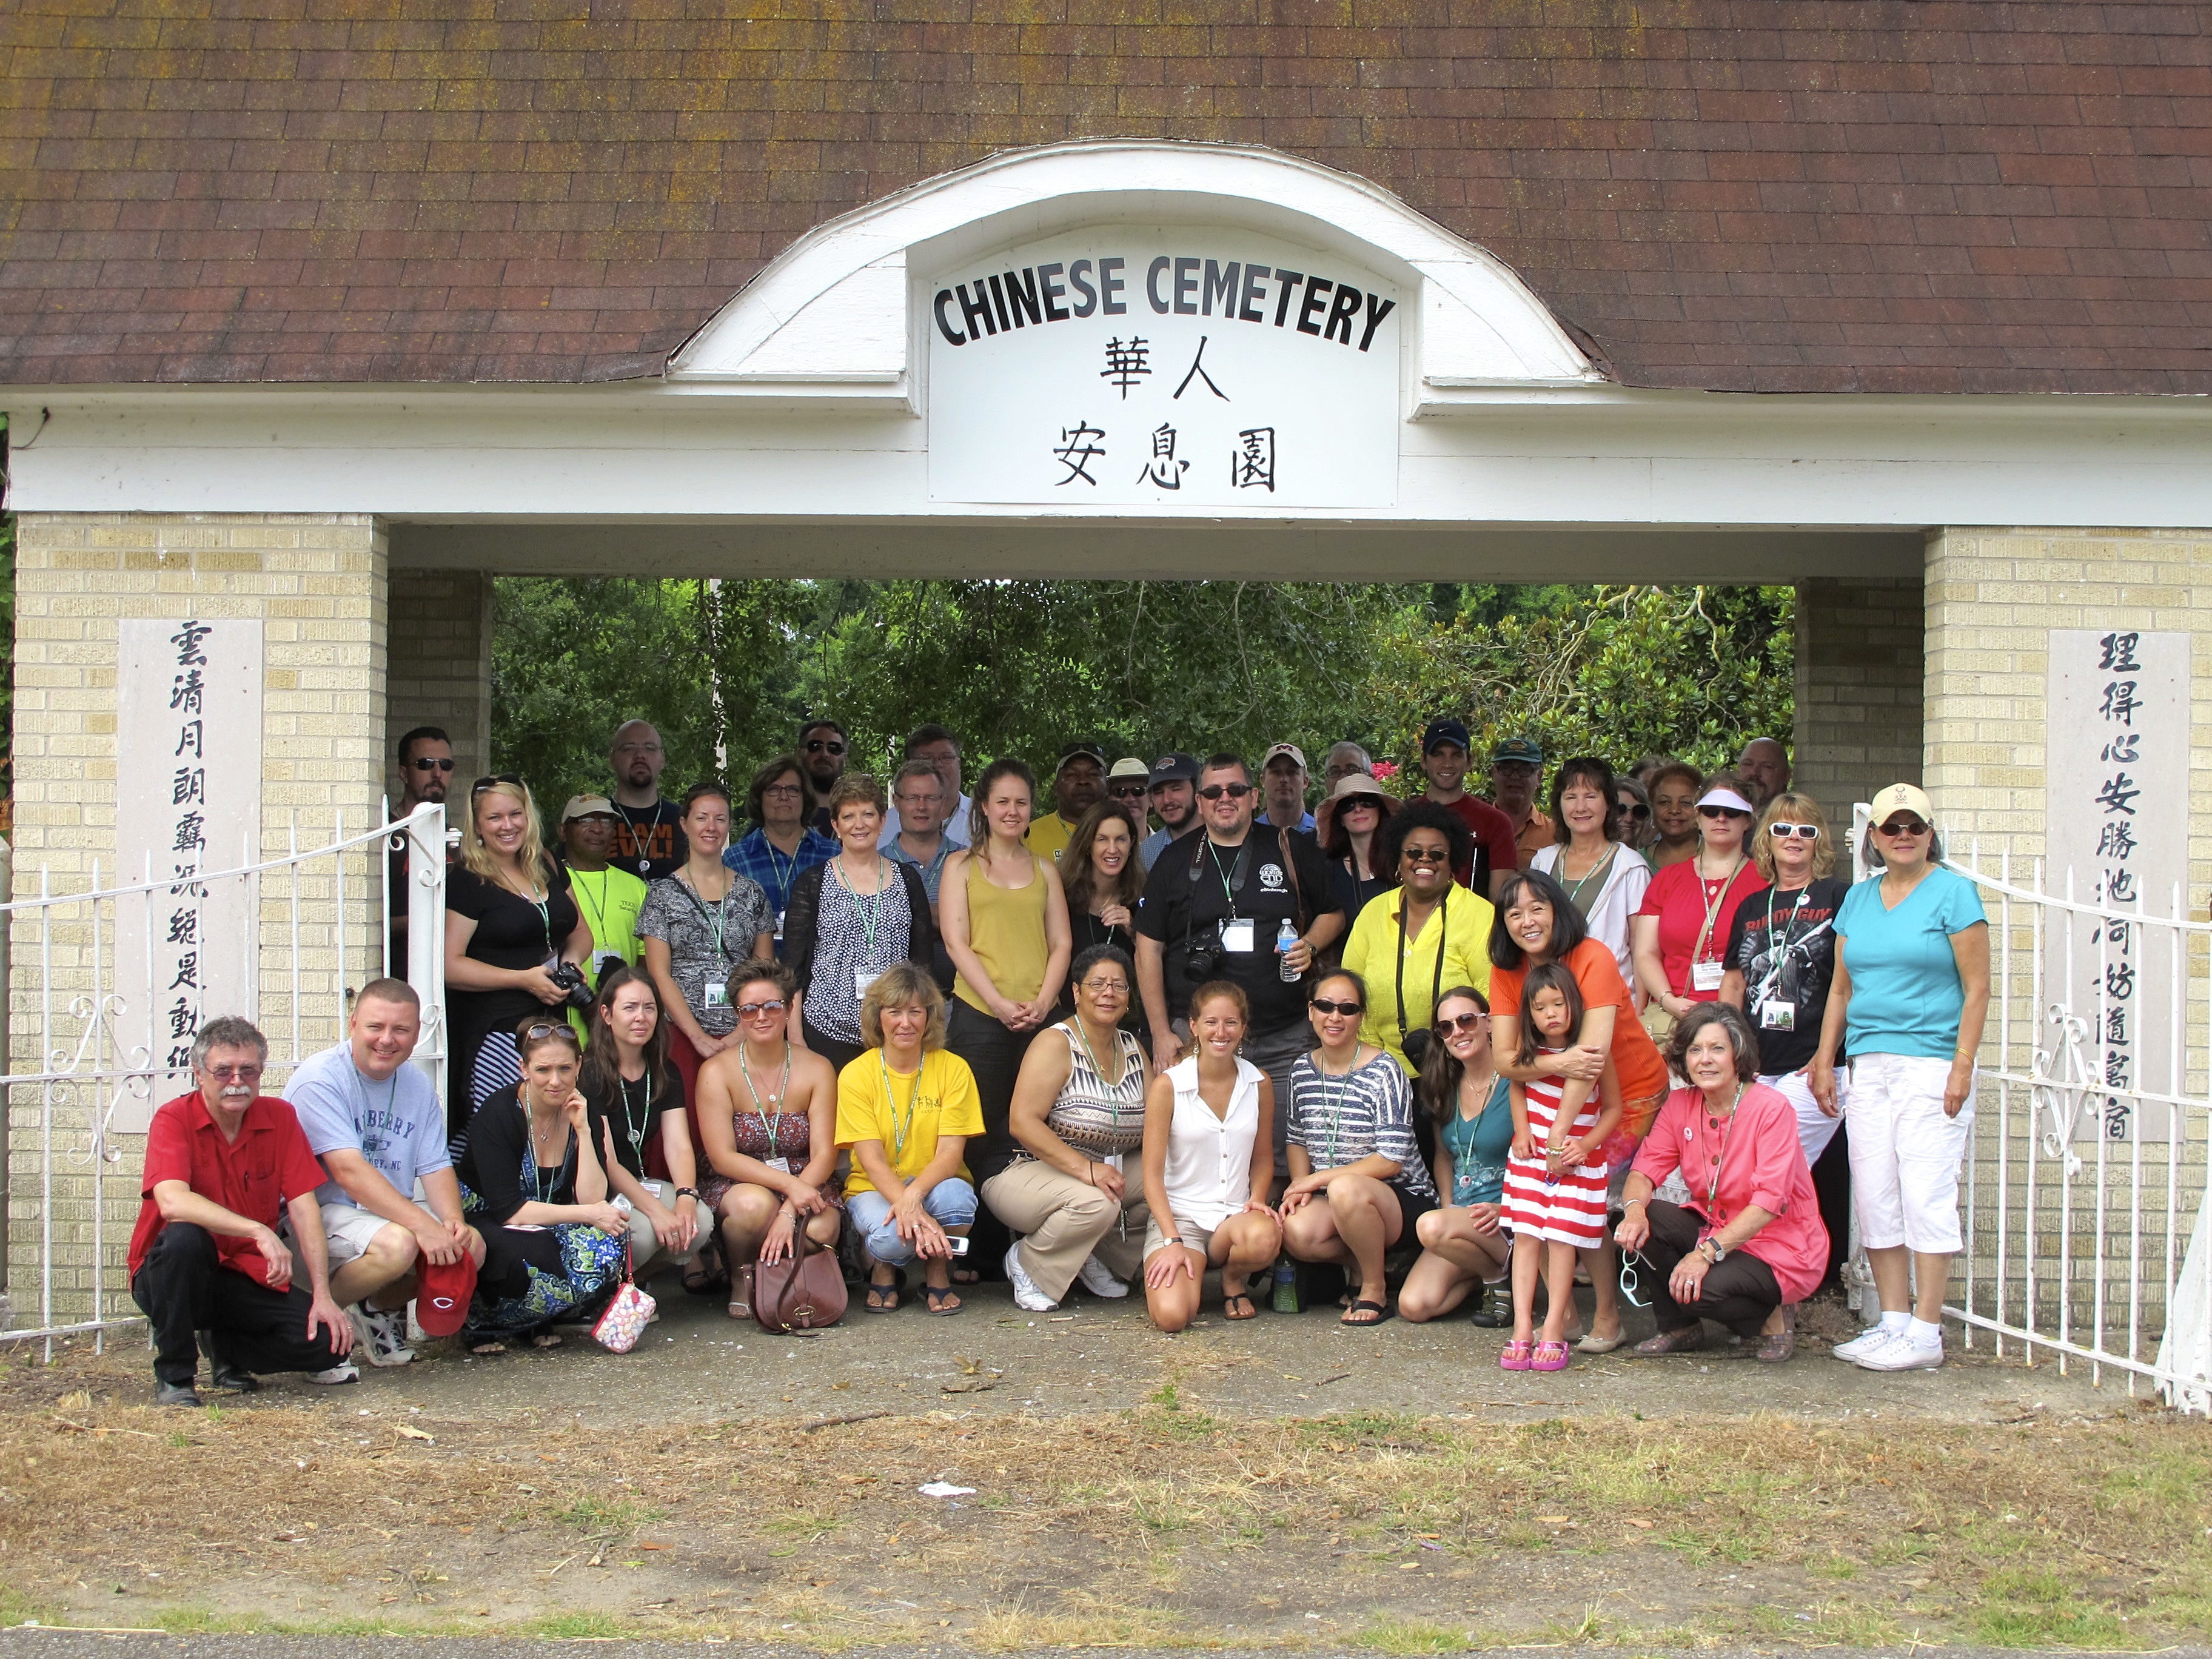 Participants of the workshop standing in front of the “New” Chinese Cemetery in Greenville, where they were introduced to the stories of the Delta Chinese by Cathy Wong. Photo by Rachel Anderson.